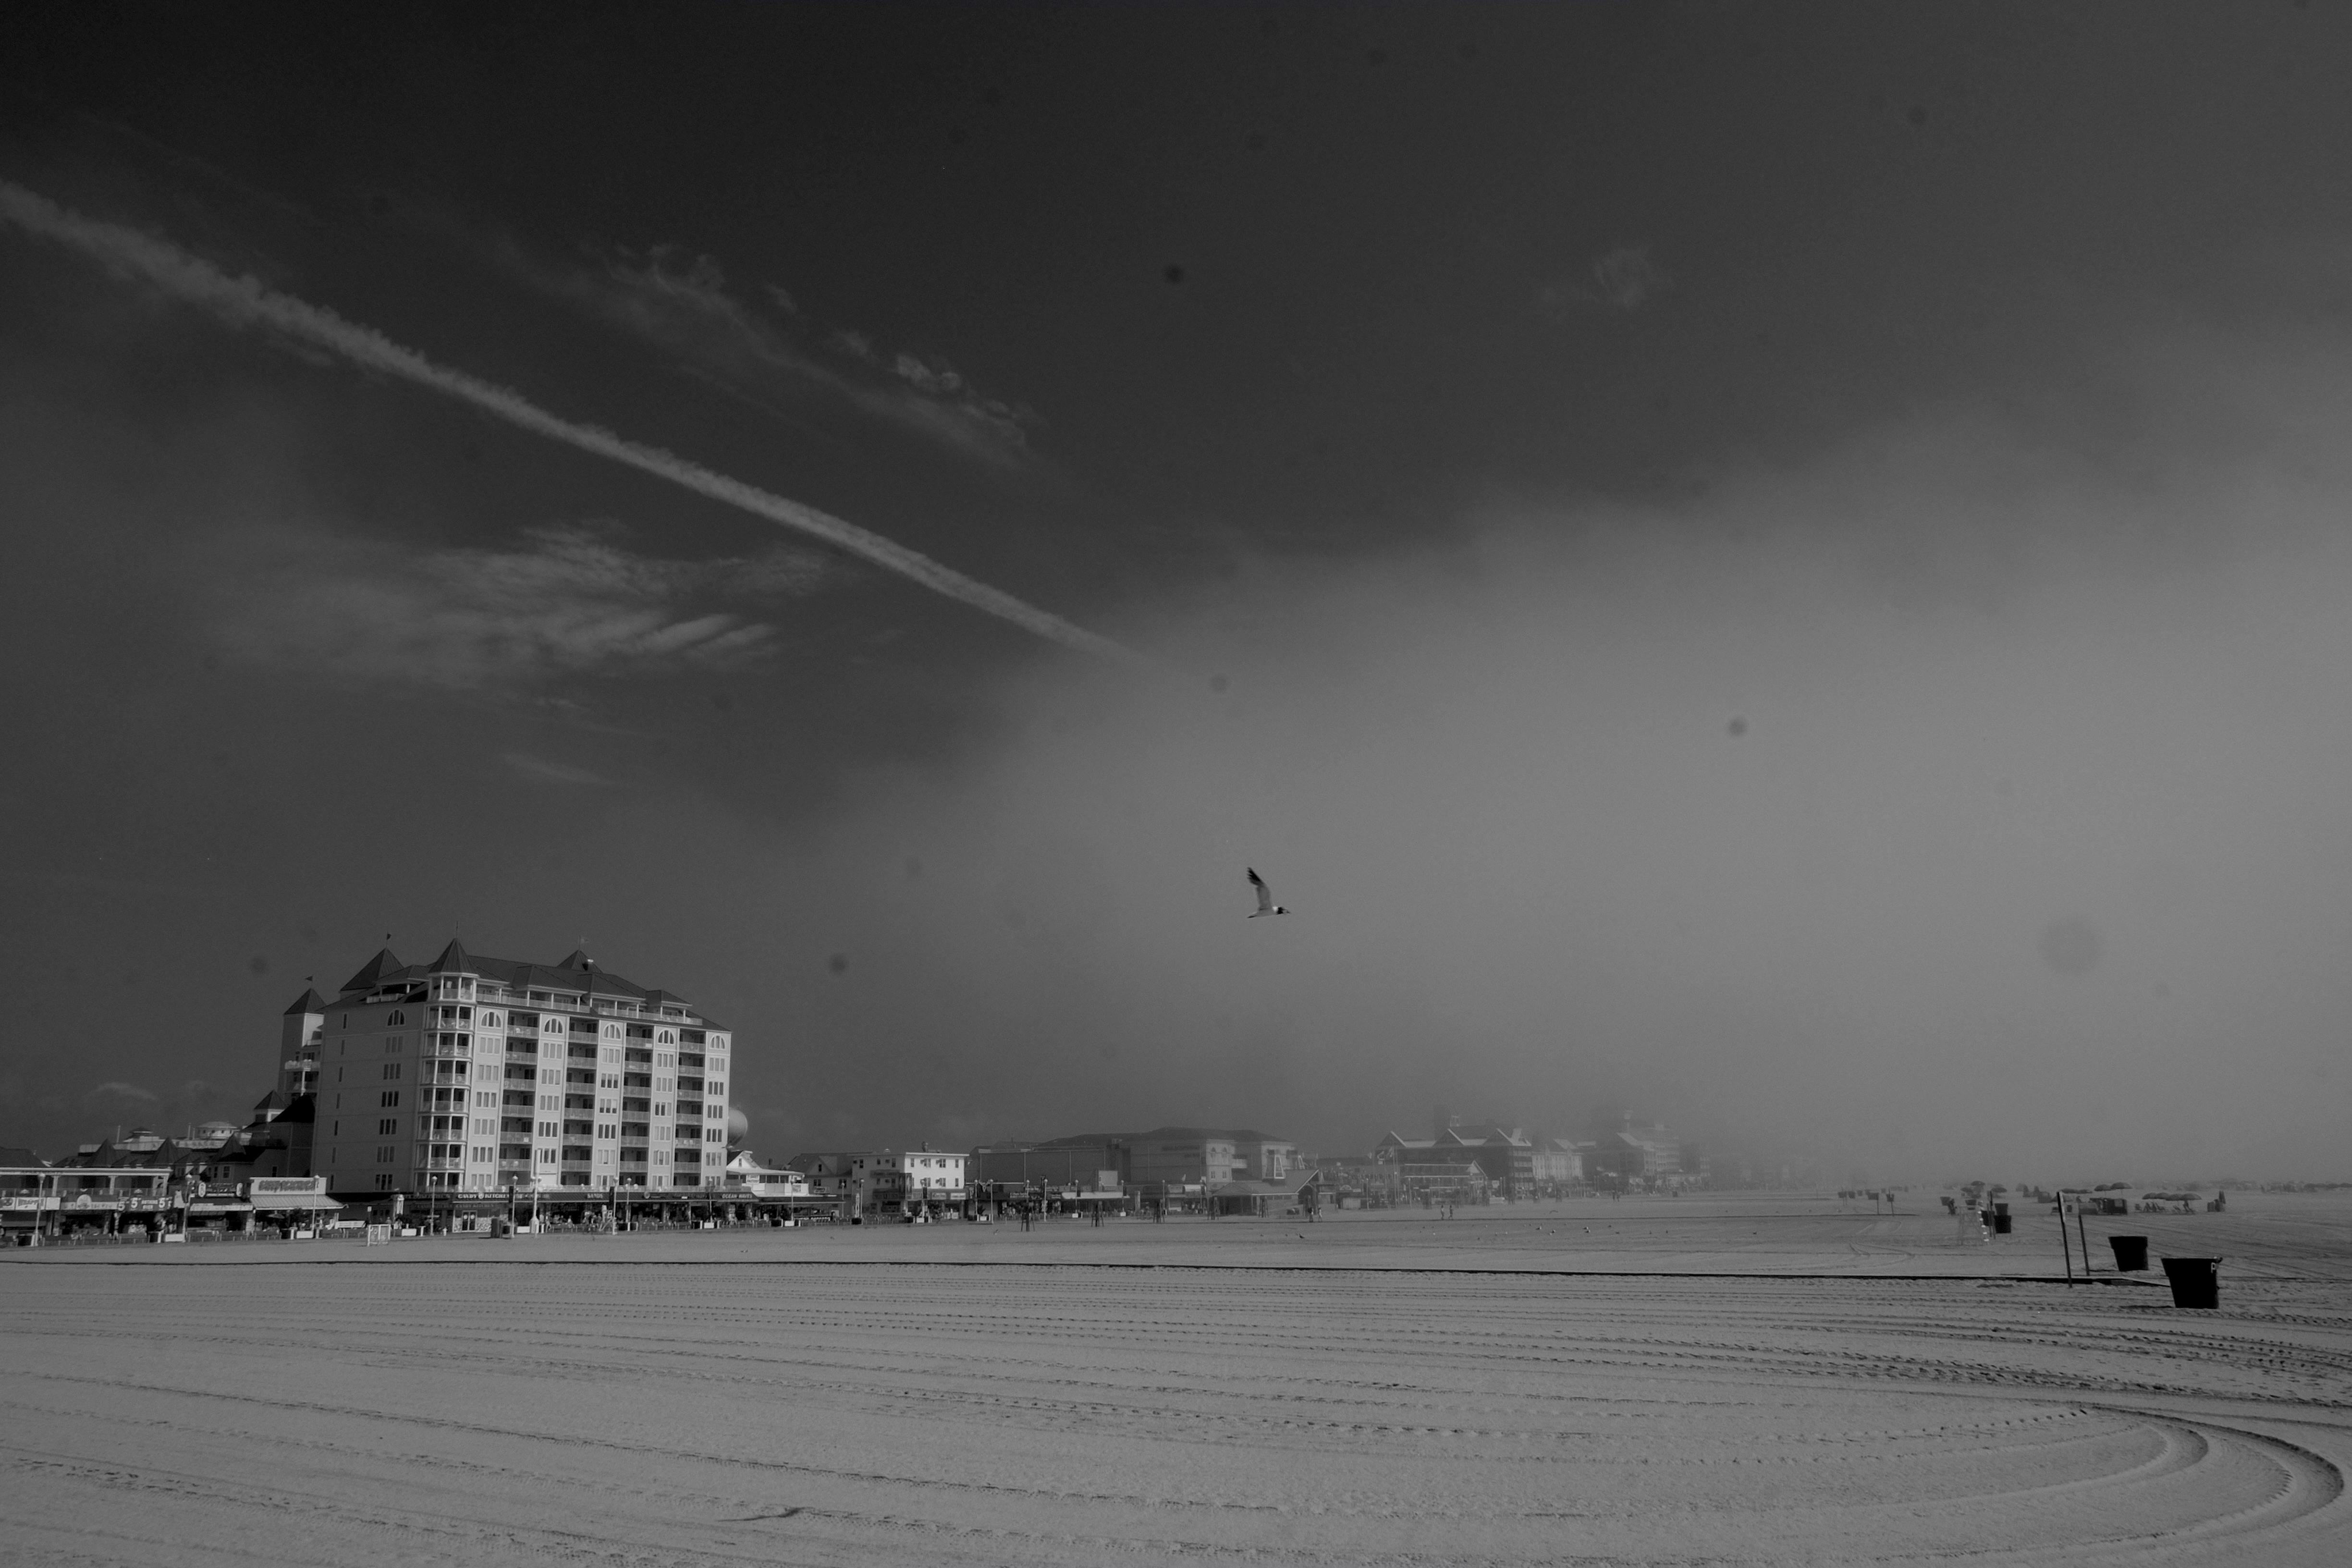 Black and white image of a beach. Fog lingers in the background, and a seagull flies in front of it. Hotels and housing are visible in the distance.